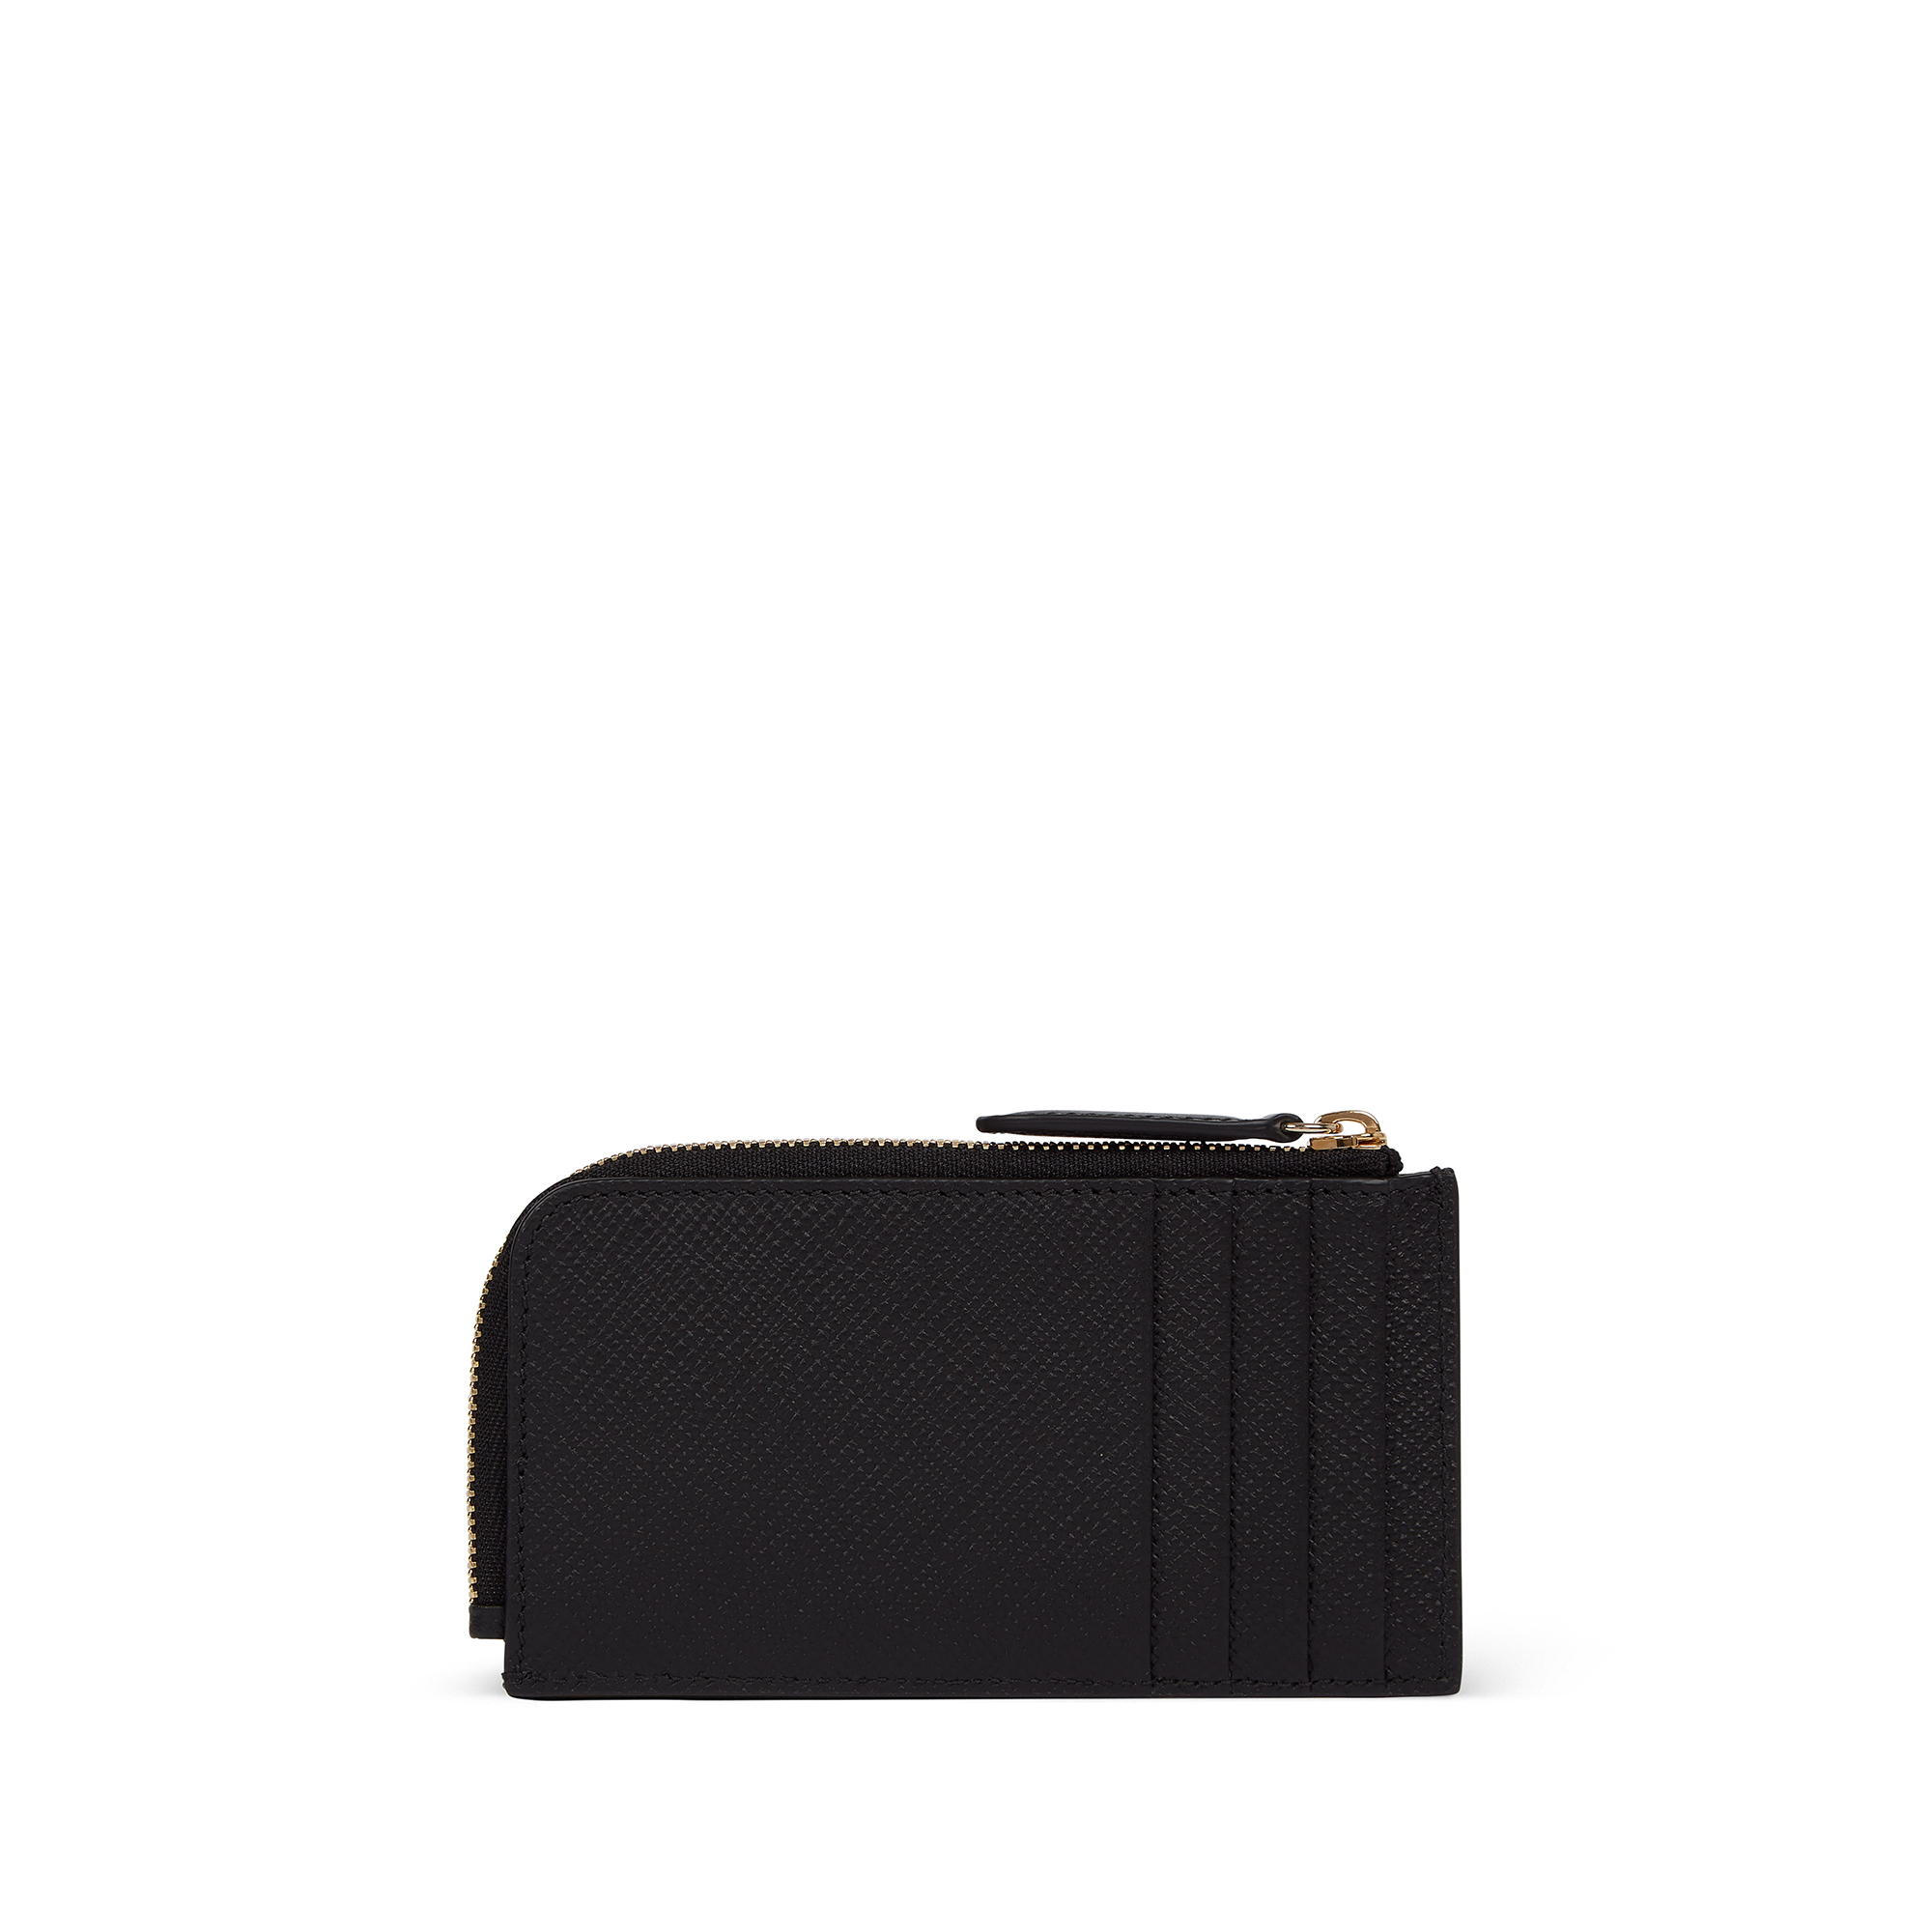 Smythson 4 Card Slot Coin Purse In Panama In Black